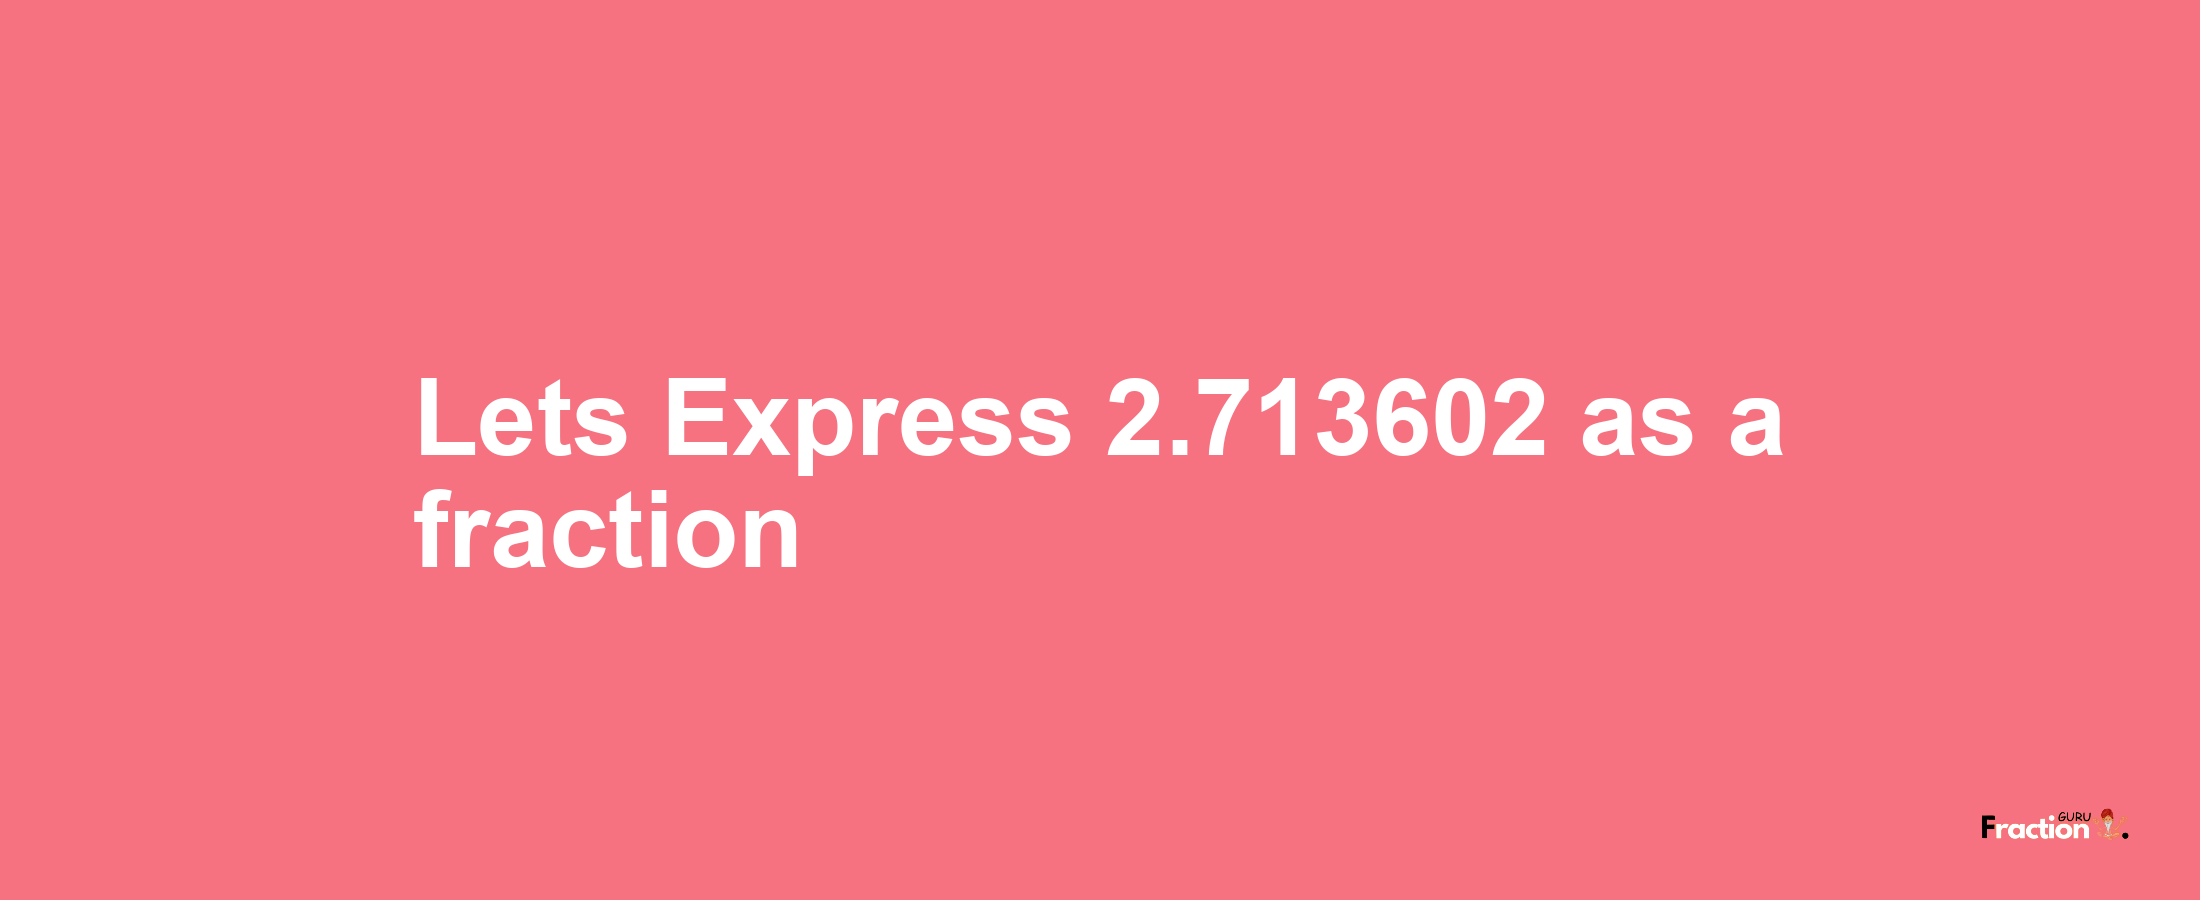 Lets Express 2.713602 as afraction